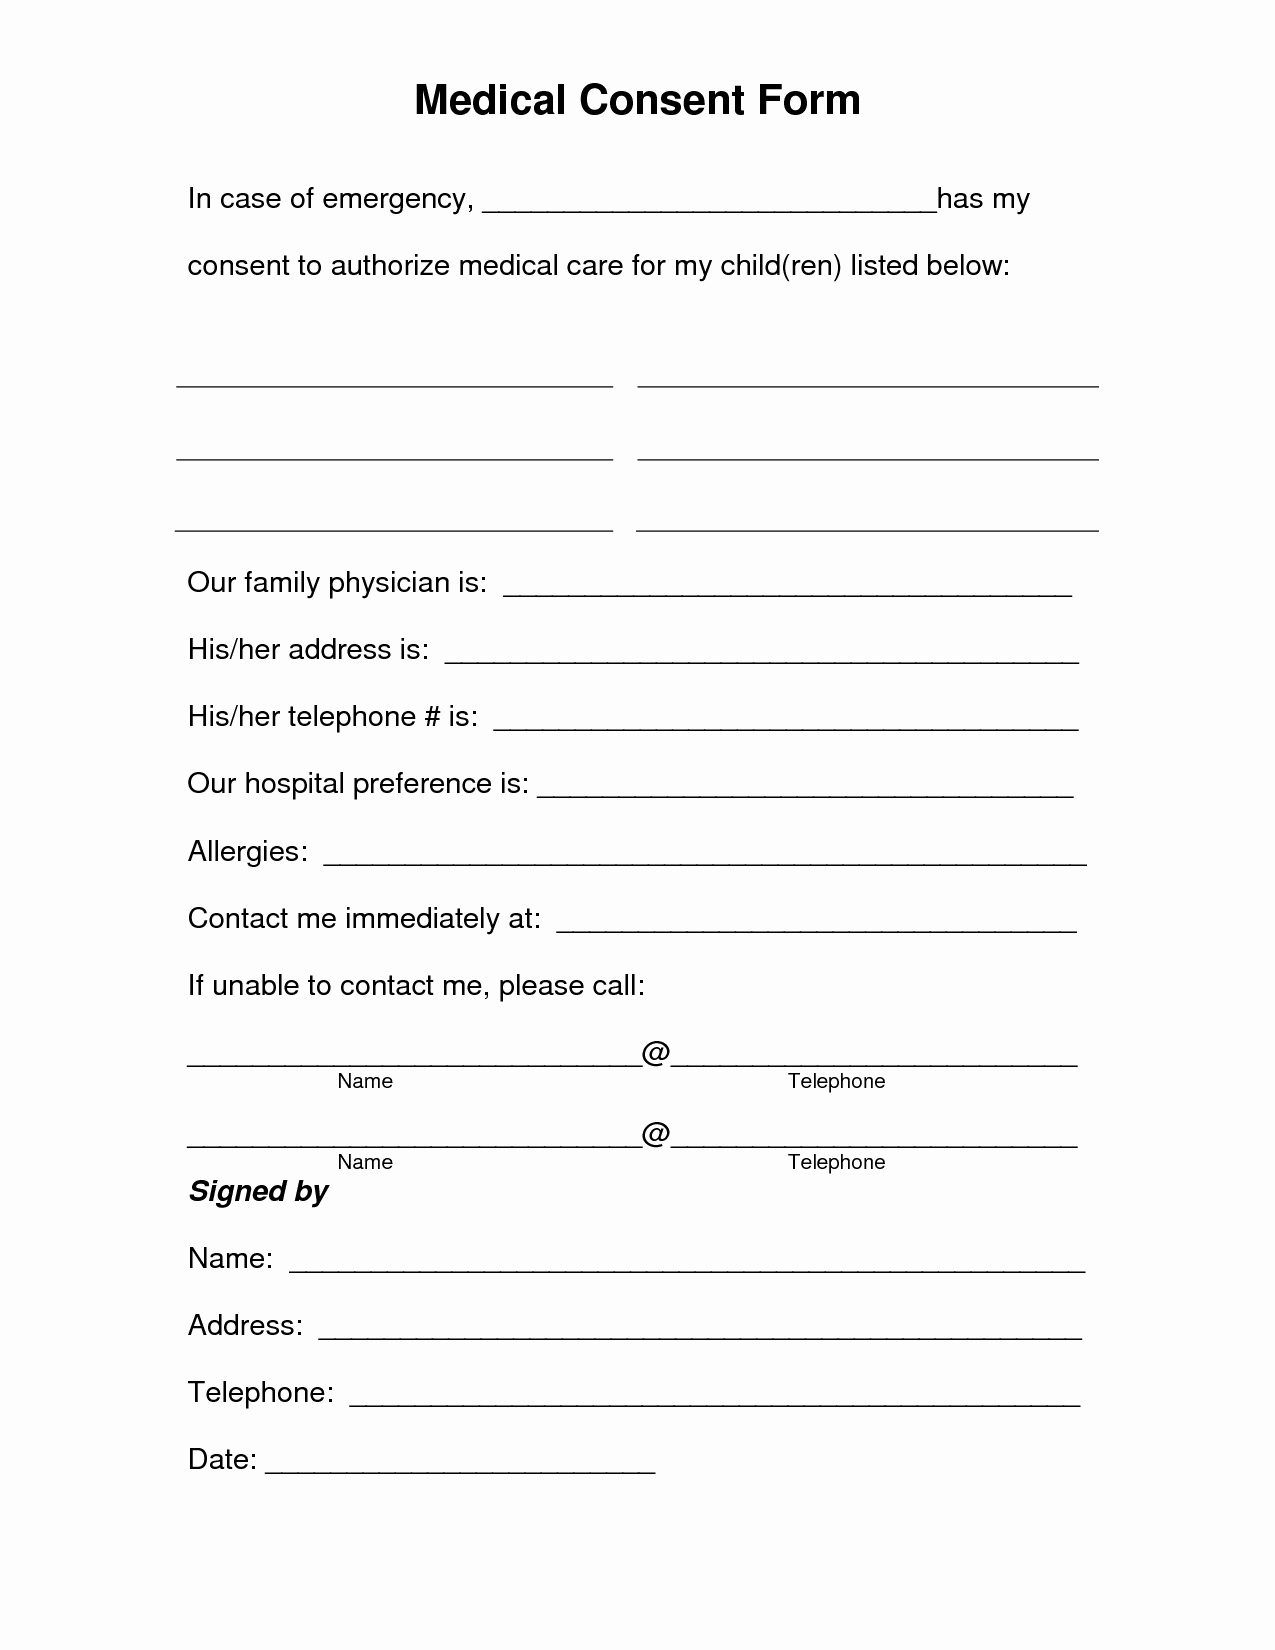 medical consent form template 3279